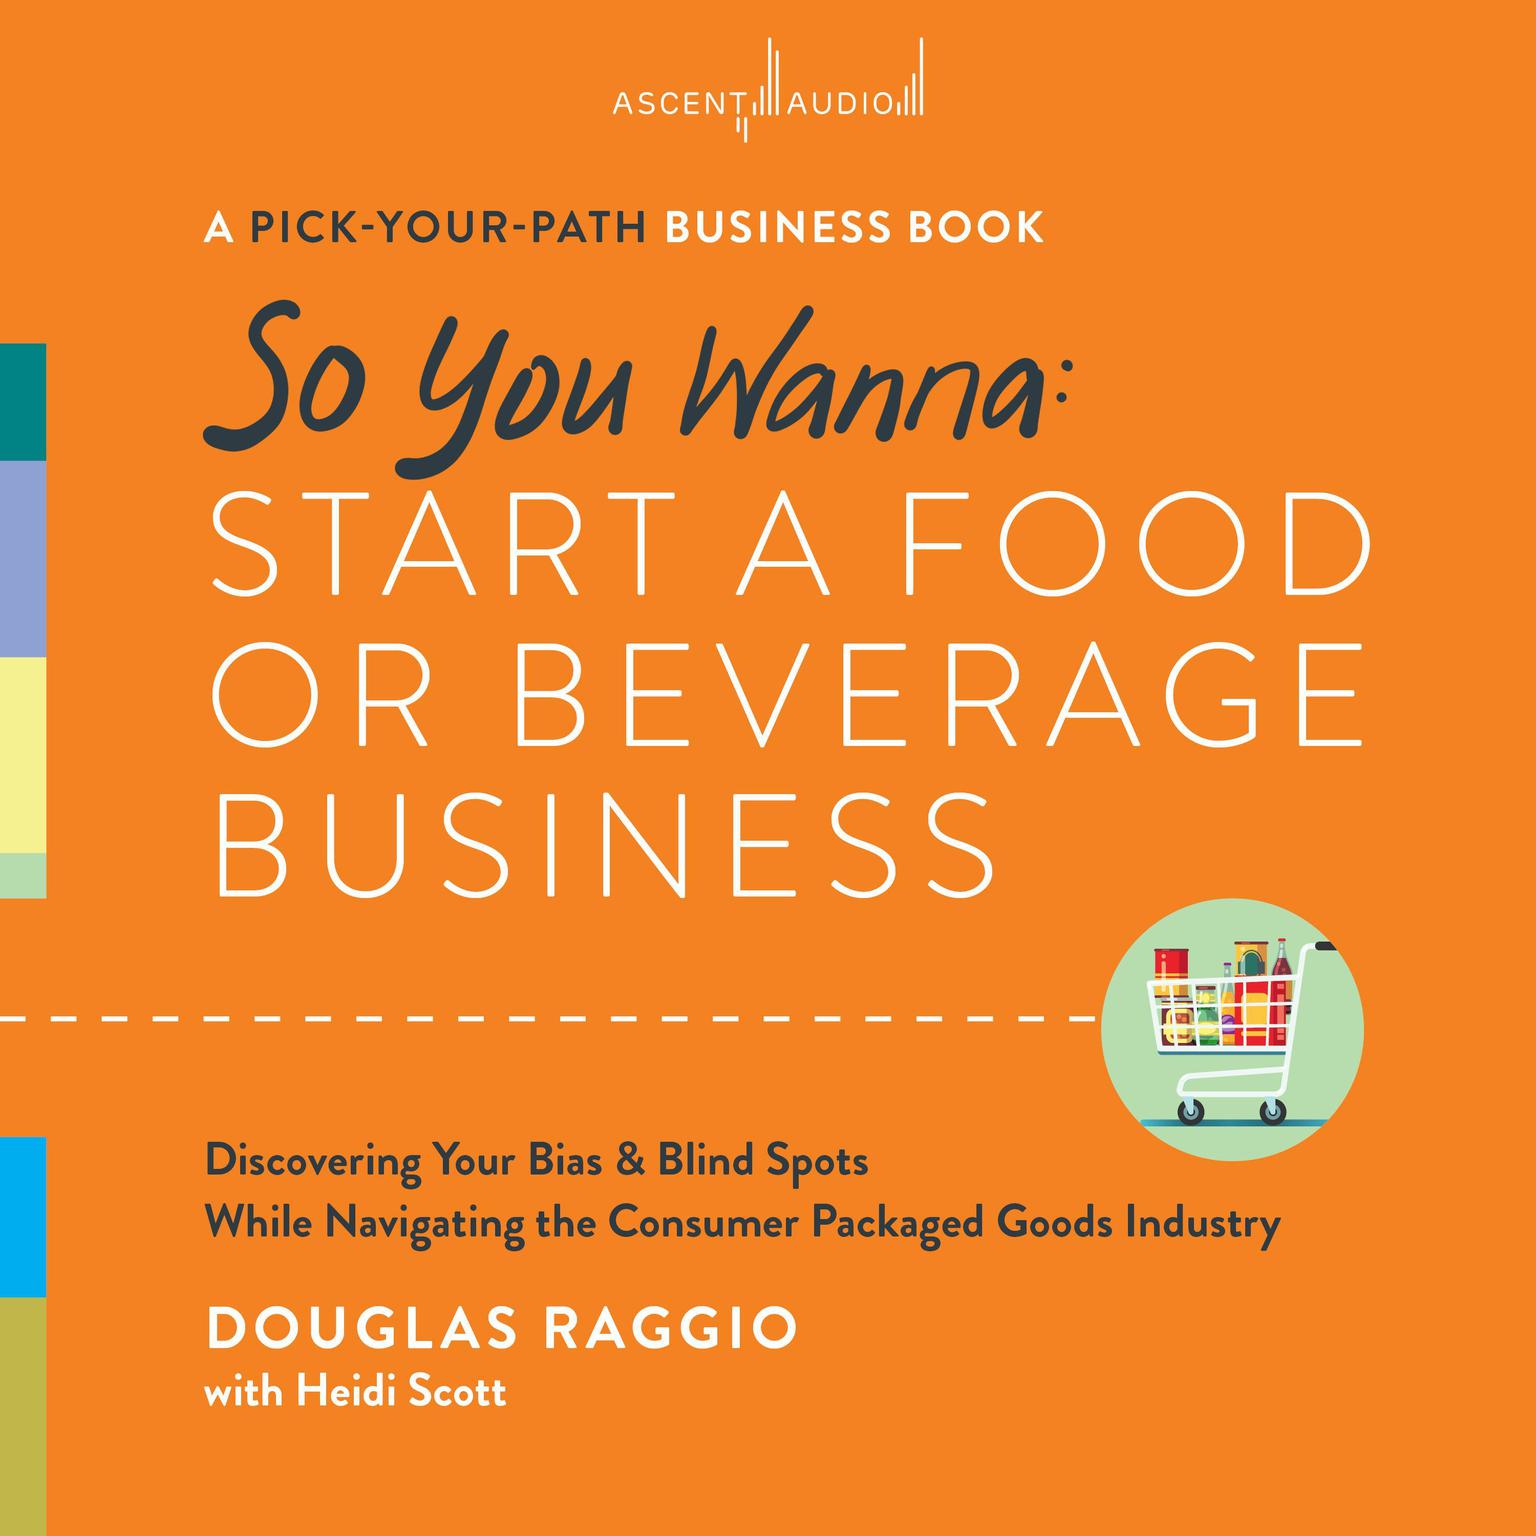 So You Wanna: Start a Food or Beverage Business: A Pick-Your-Path Business Audiobook, by Douglas Raggio